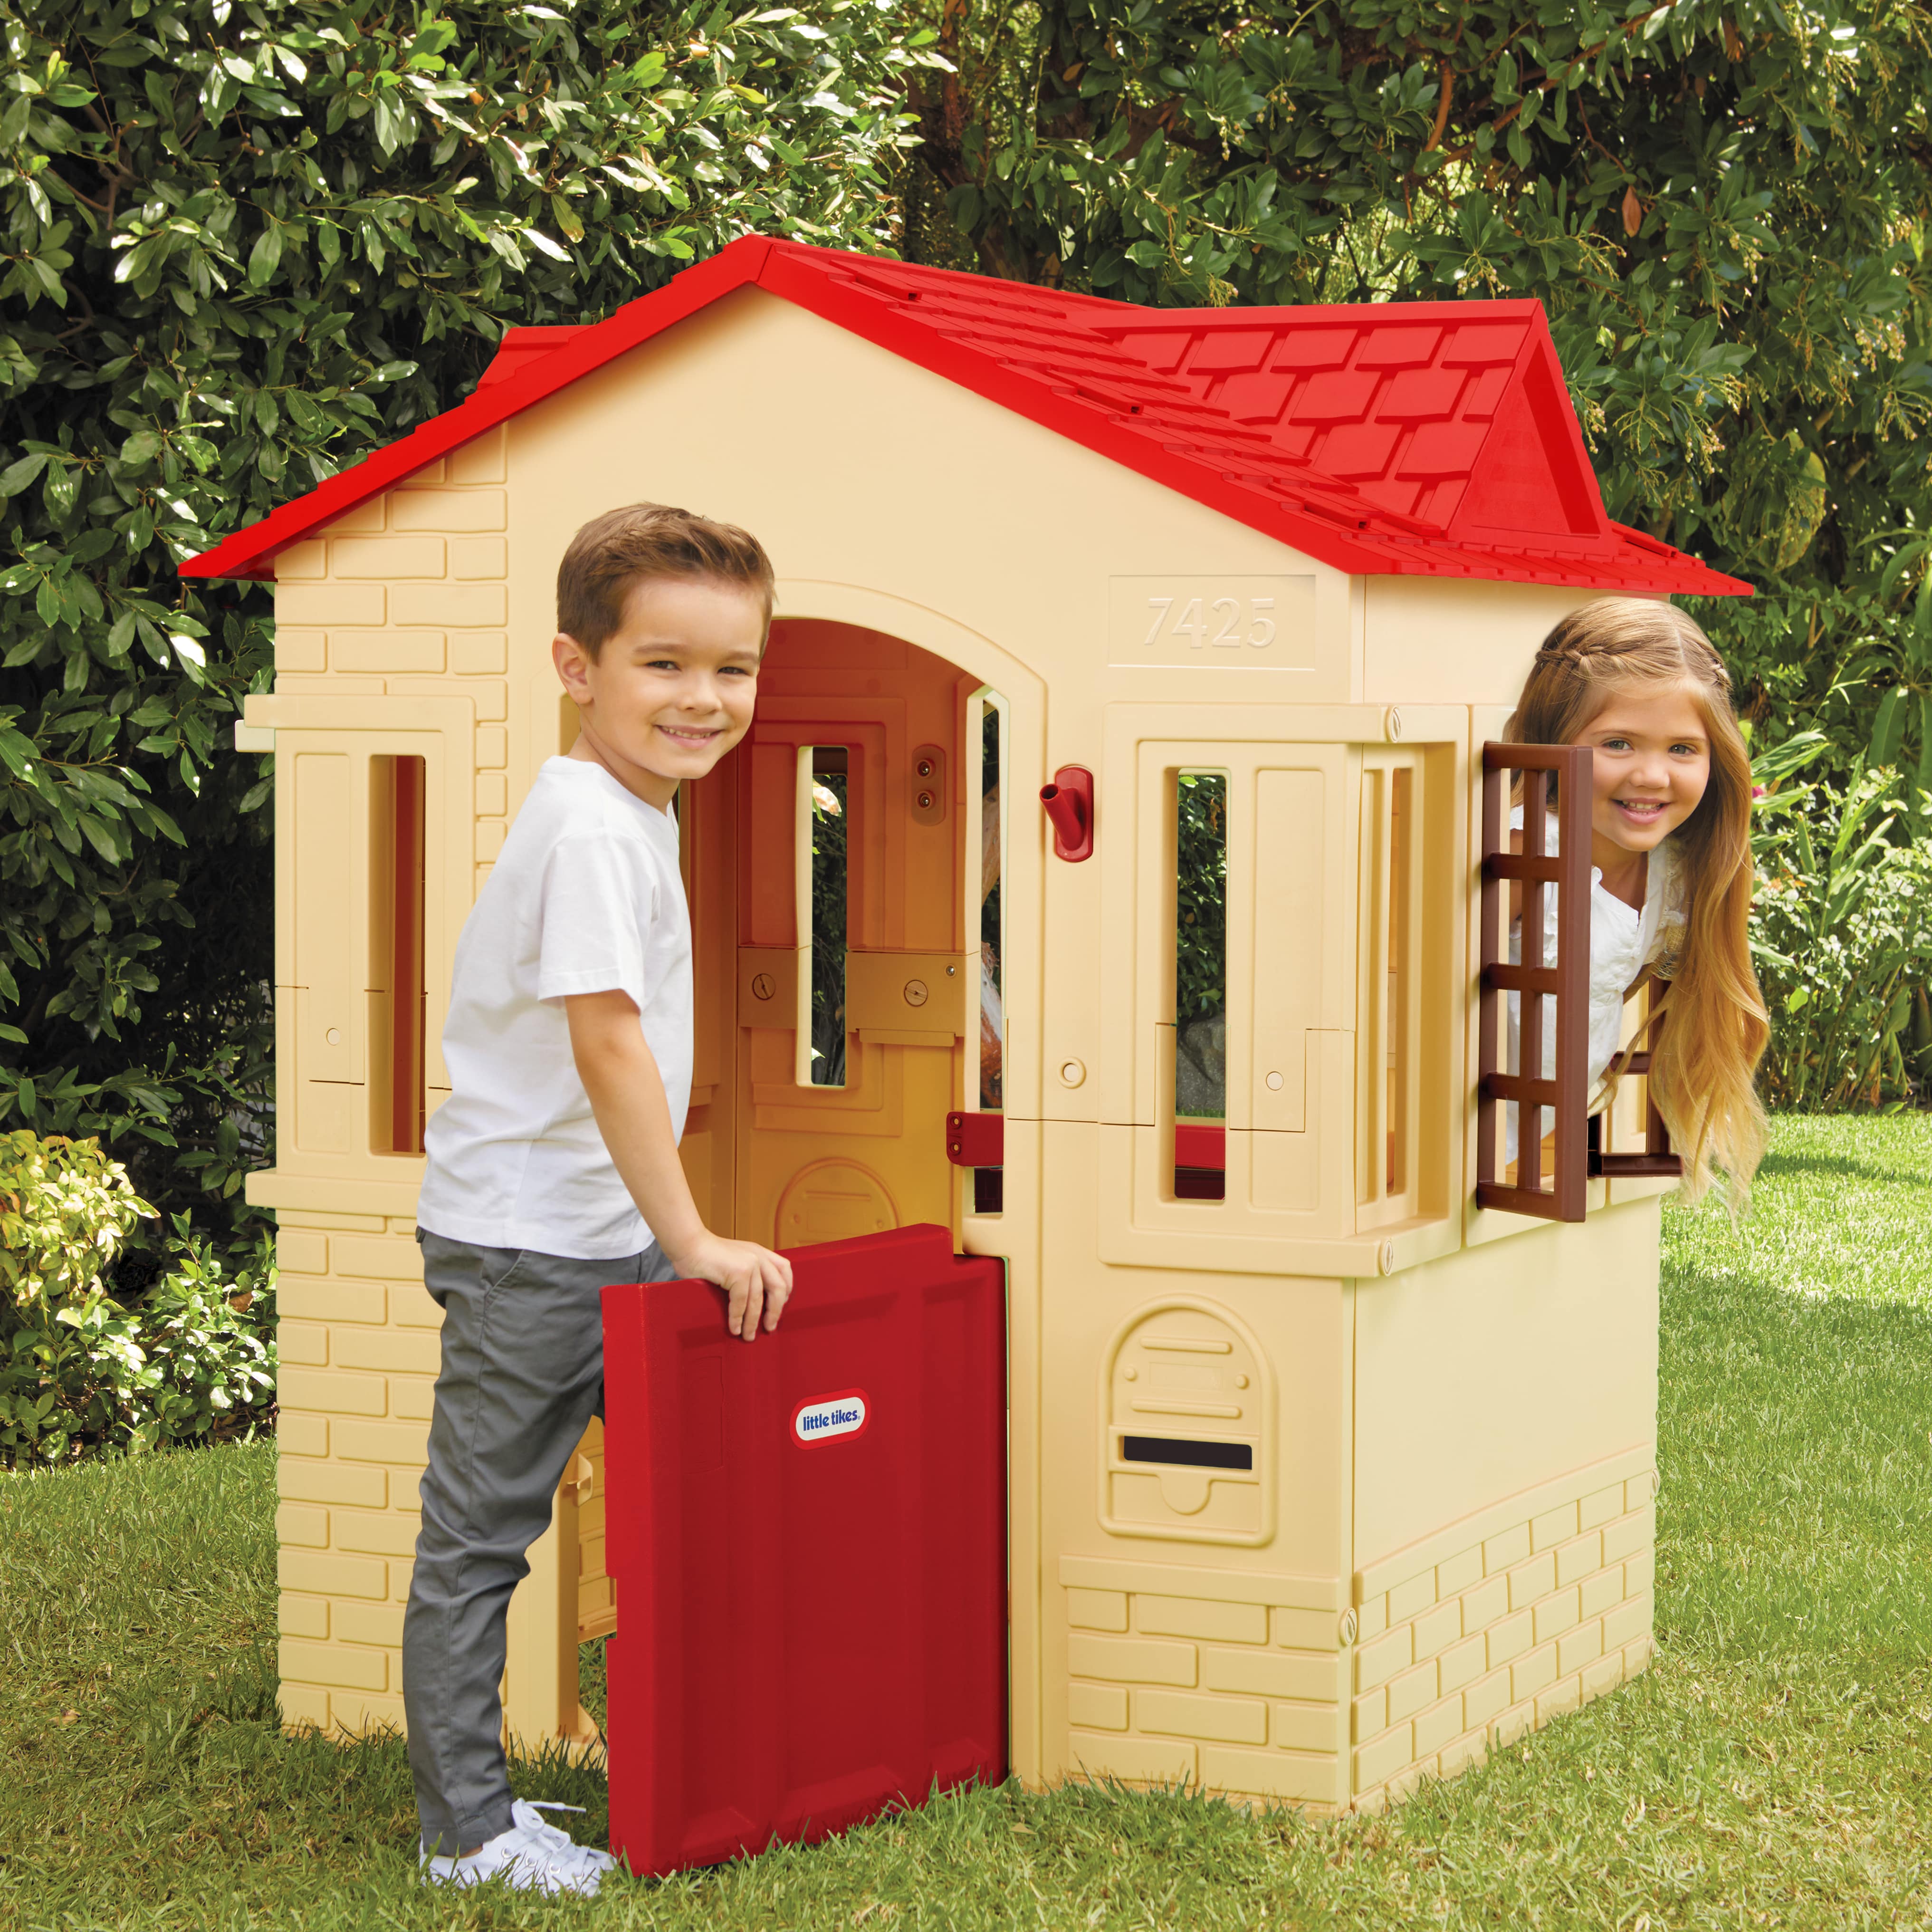 Little Tikes Cape Cottage Playhouse, Tan - image 1 of 7